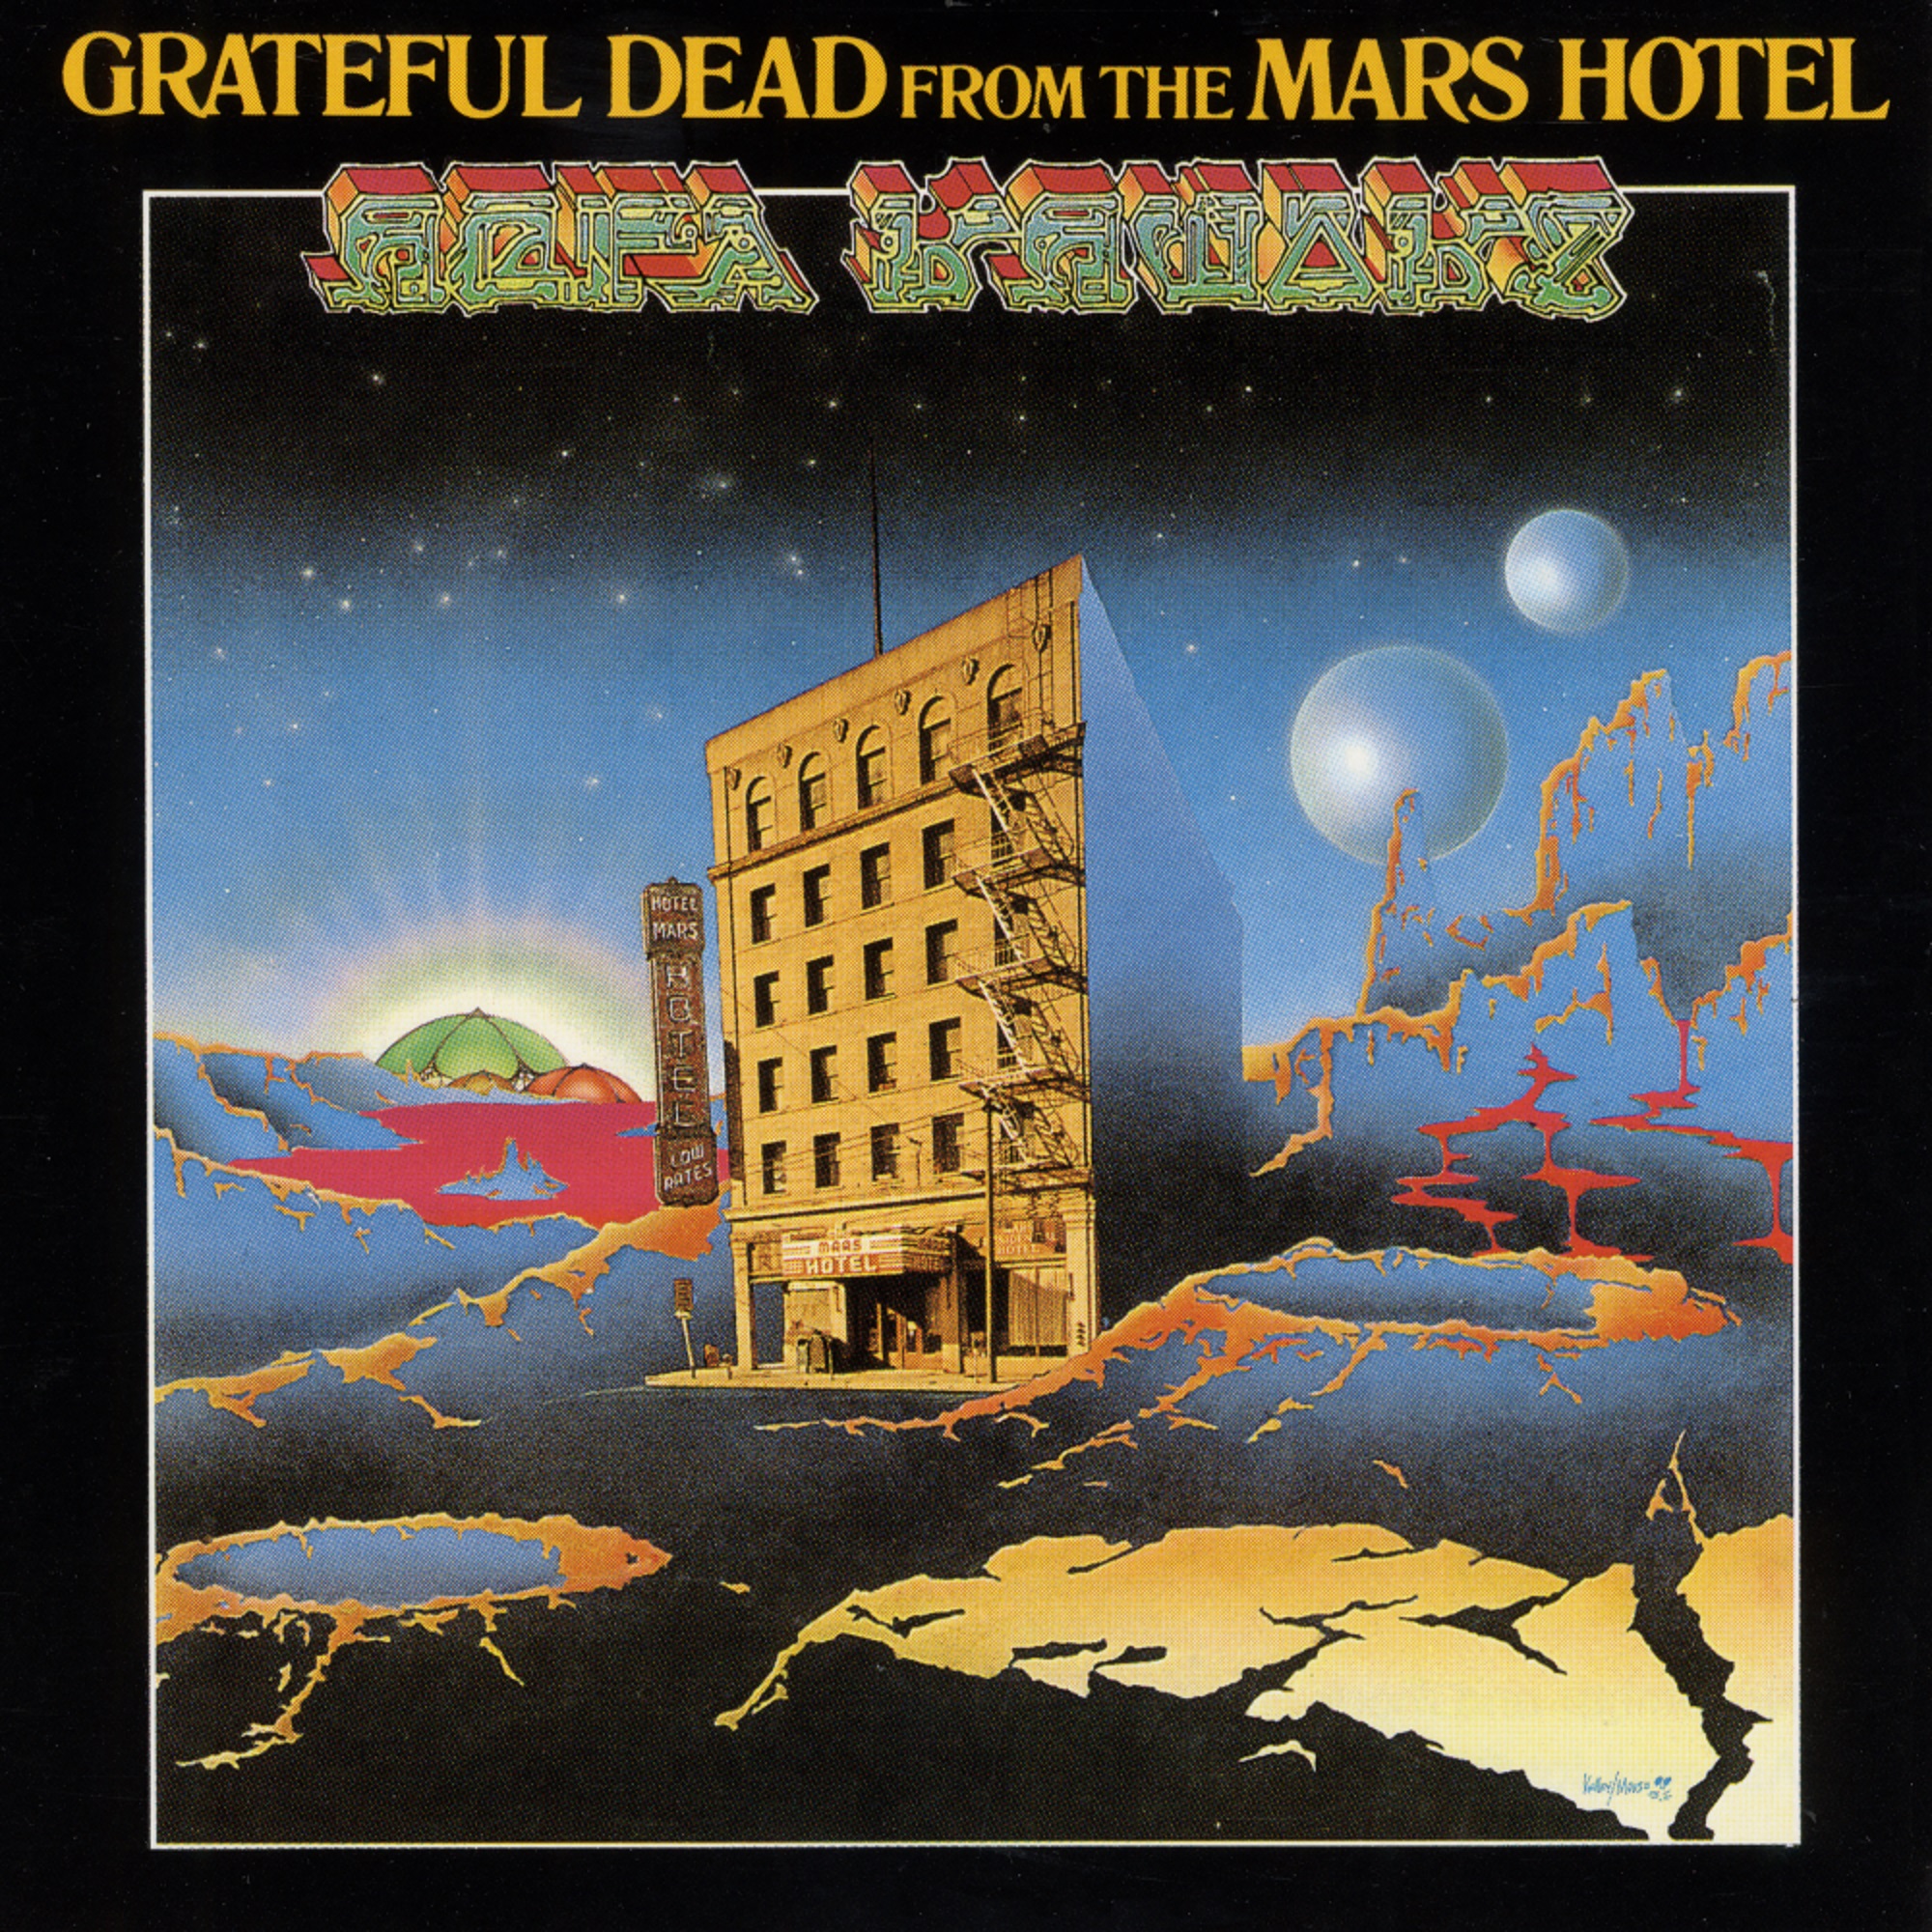 Grateful Dead's Mars Hotel Celebrates 50th Anniversary, Remastered & Expanded with Demos, Live Sets + More